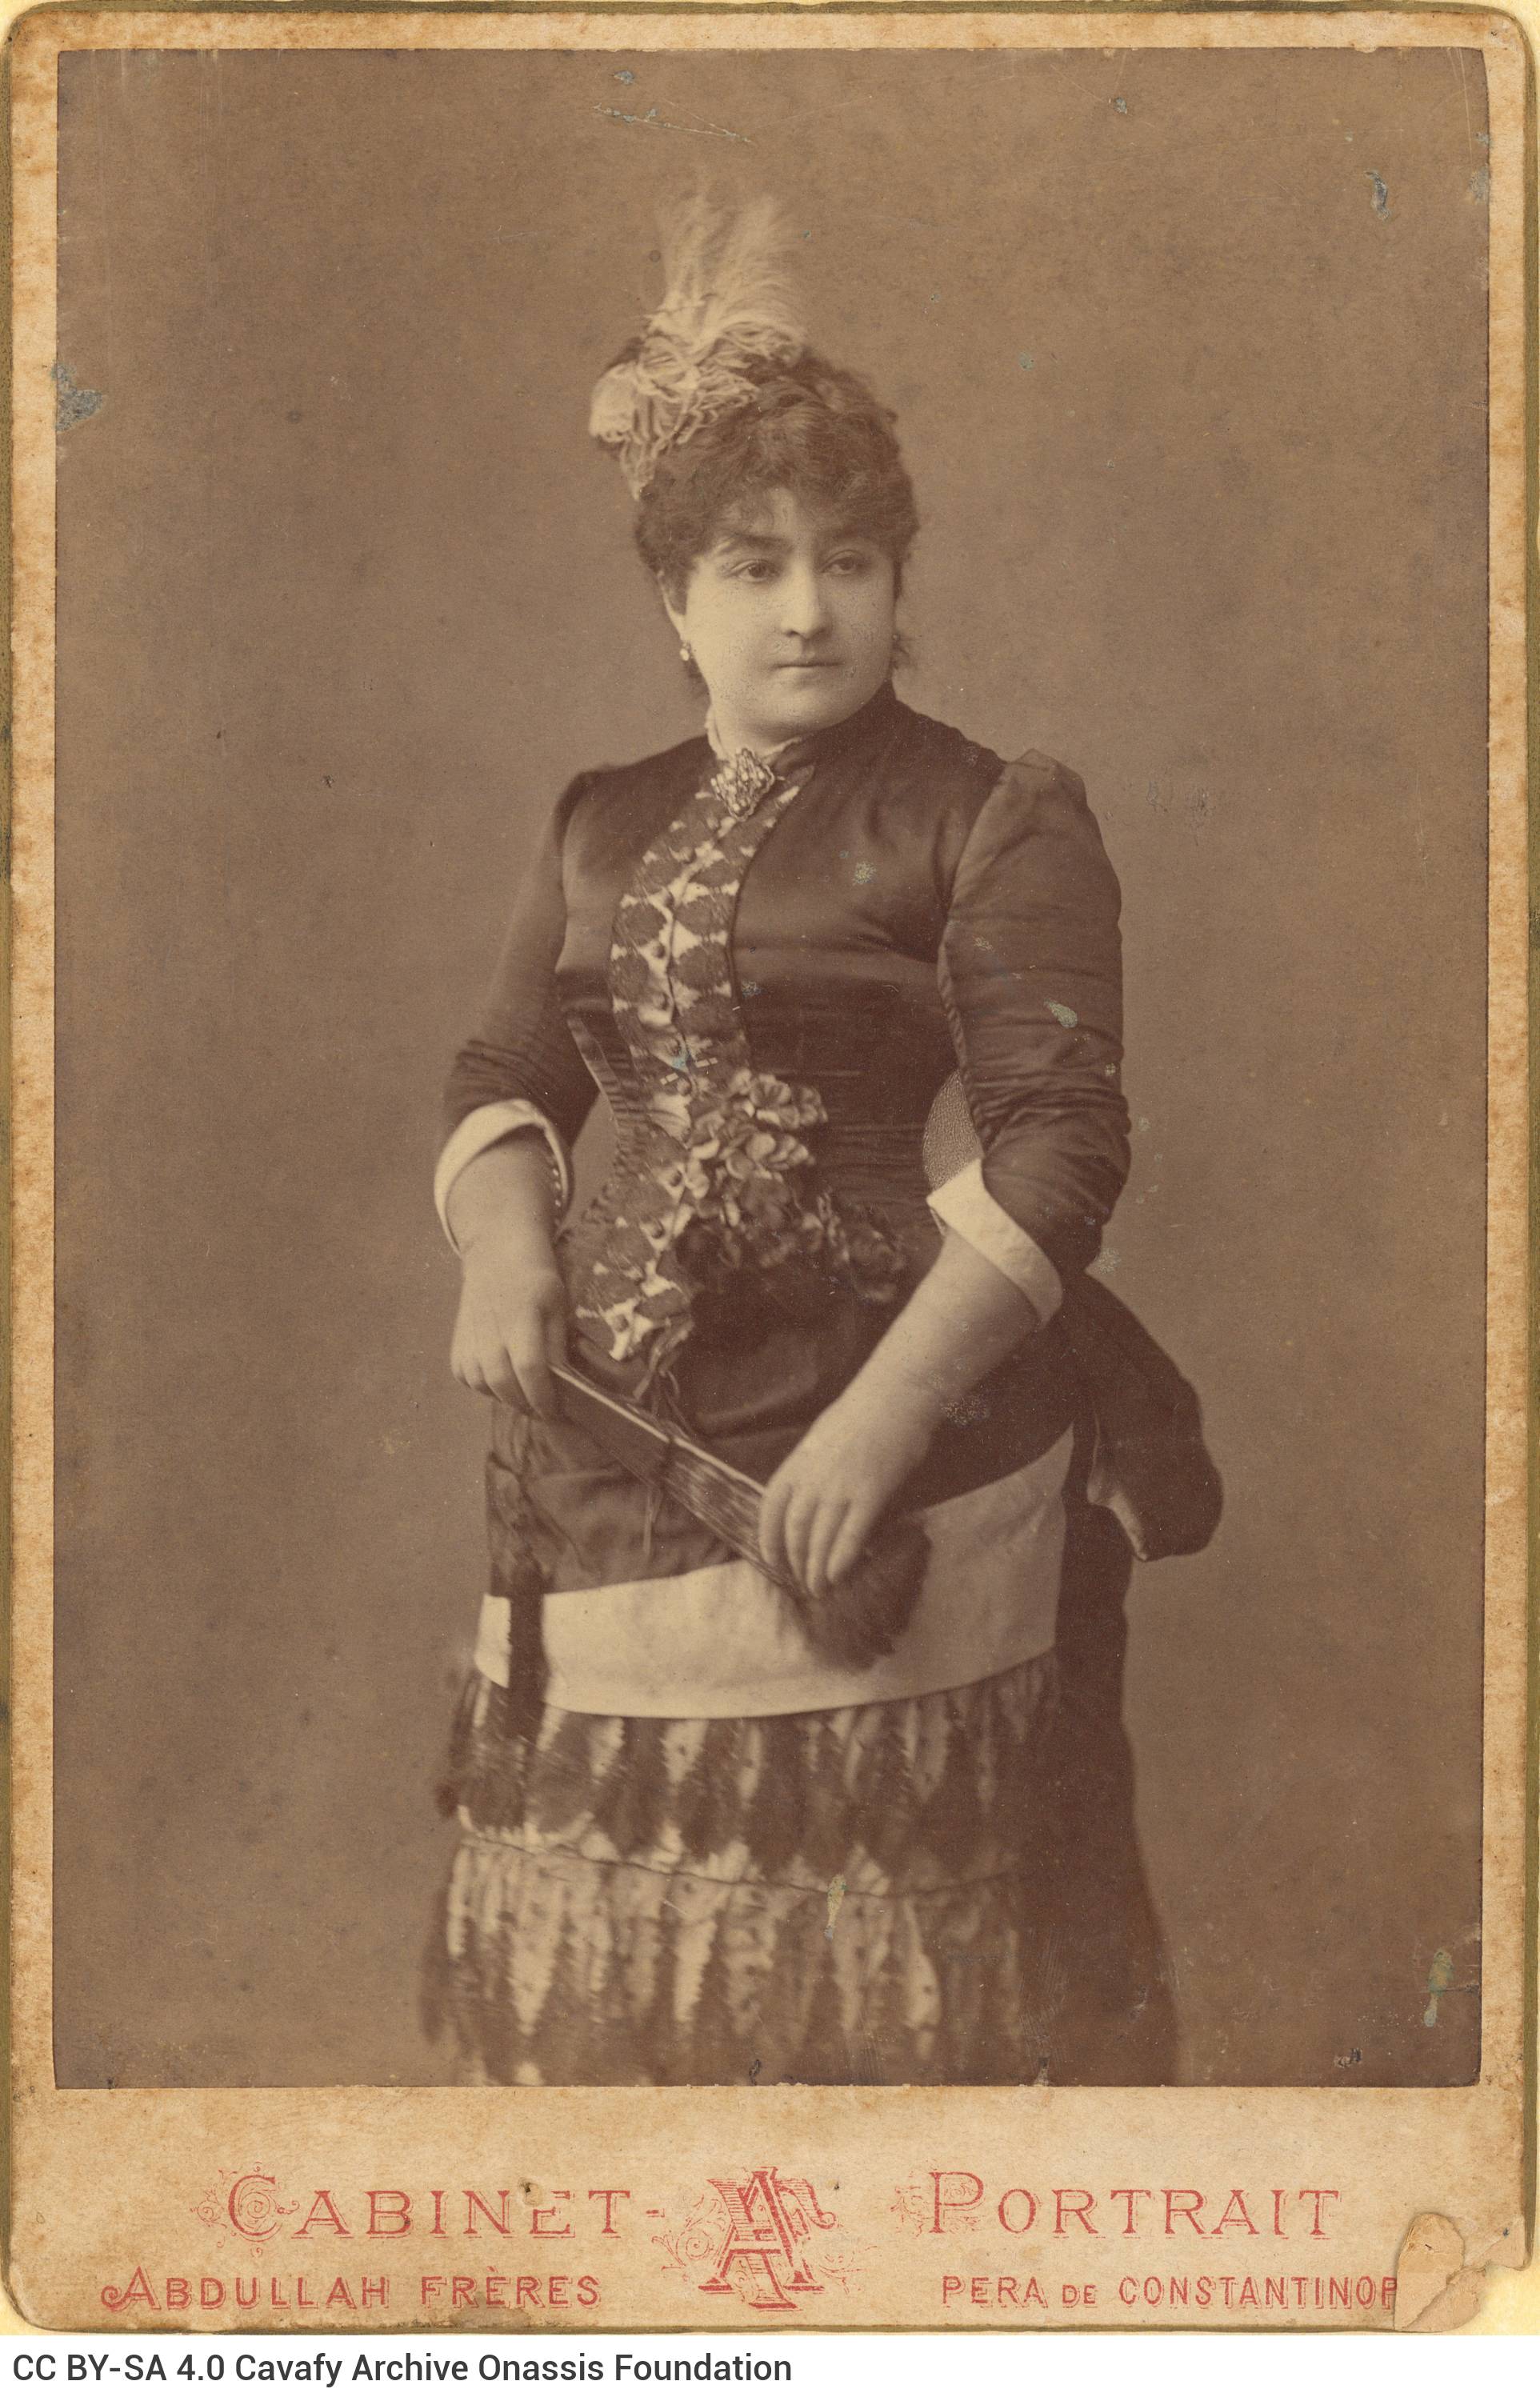 Photograph of Charikleia Cavafy in Istanbul (1882-1885). She is wearing a long dress with embroidery and lace and is holding 